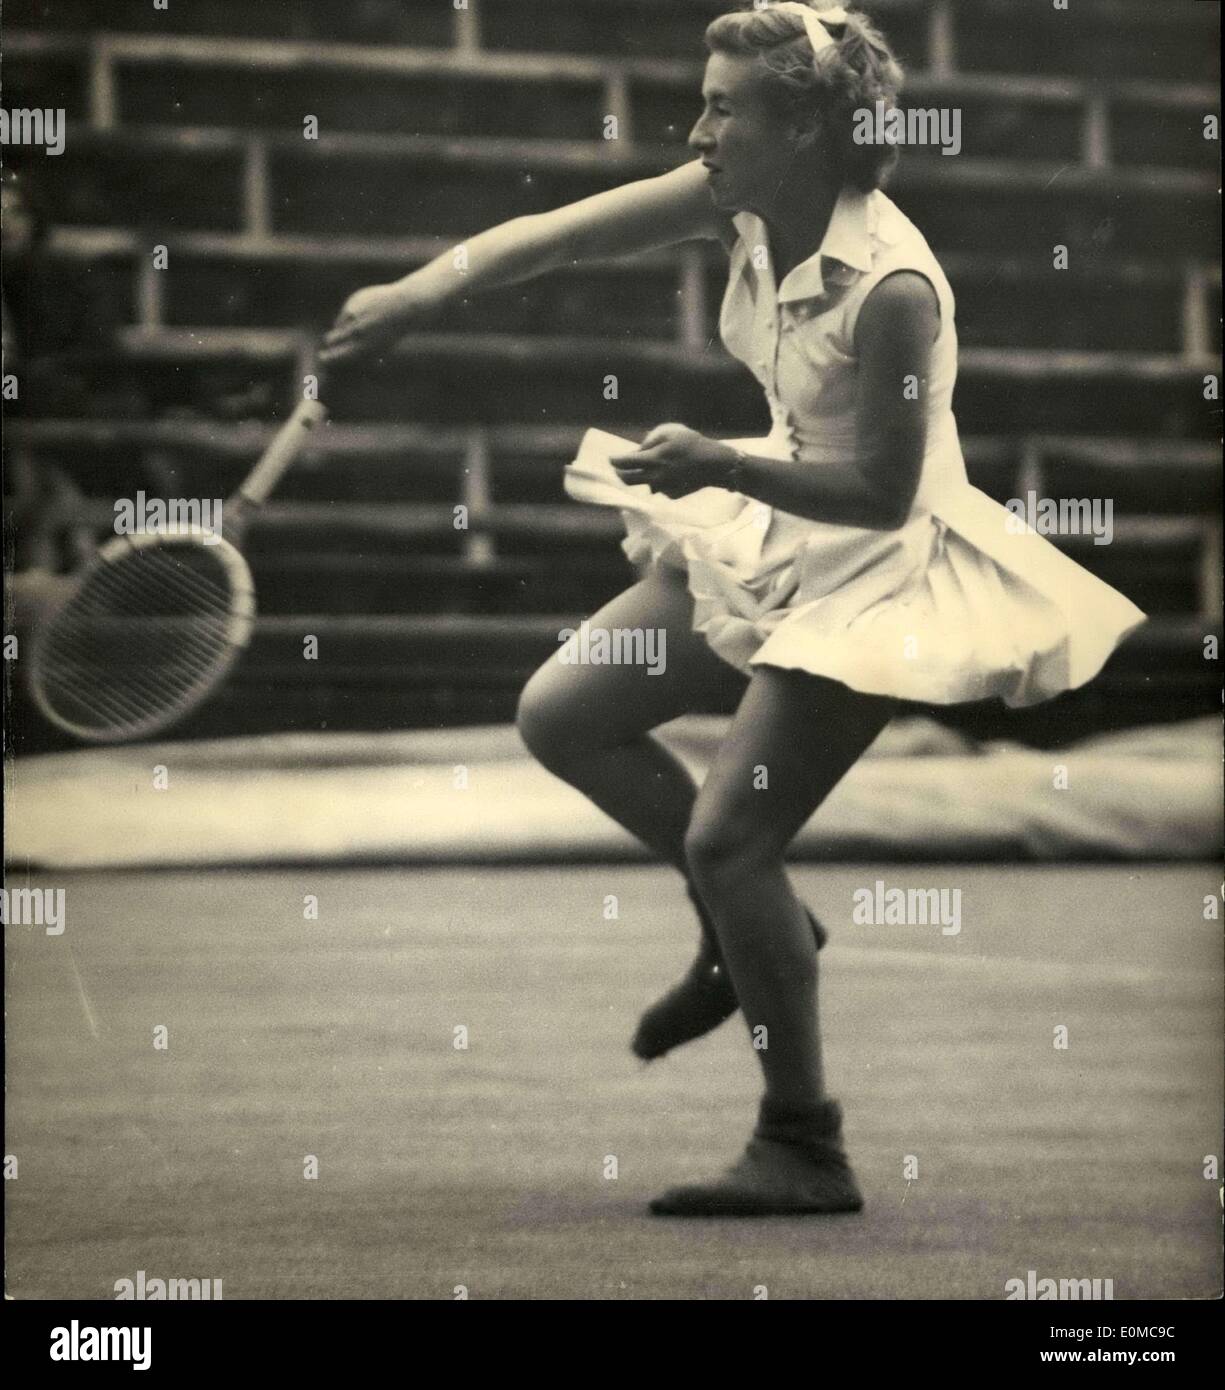 Jun. 12, 1954 - ''Little Mo'' in action. Miss Maureen (''Little Mo'') Connolly, (U.S.A.), defeated Miss Shilcock, of Britain, 6-2, 6-2, to give the united states a 5-0 lead in the ladies international team match fro the wight-man cup, played at Wimbledon. America won the match. Photo shows Miss Maureen Connolly in play against Miss Shilcock at Wimbledon today. Stock Photo